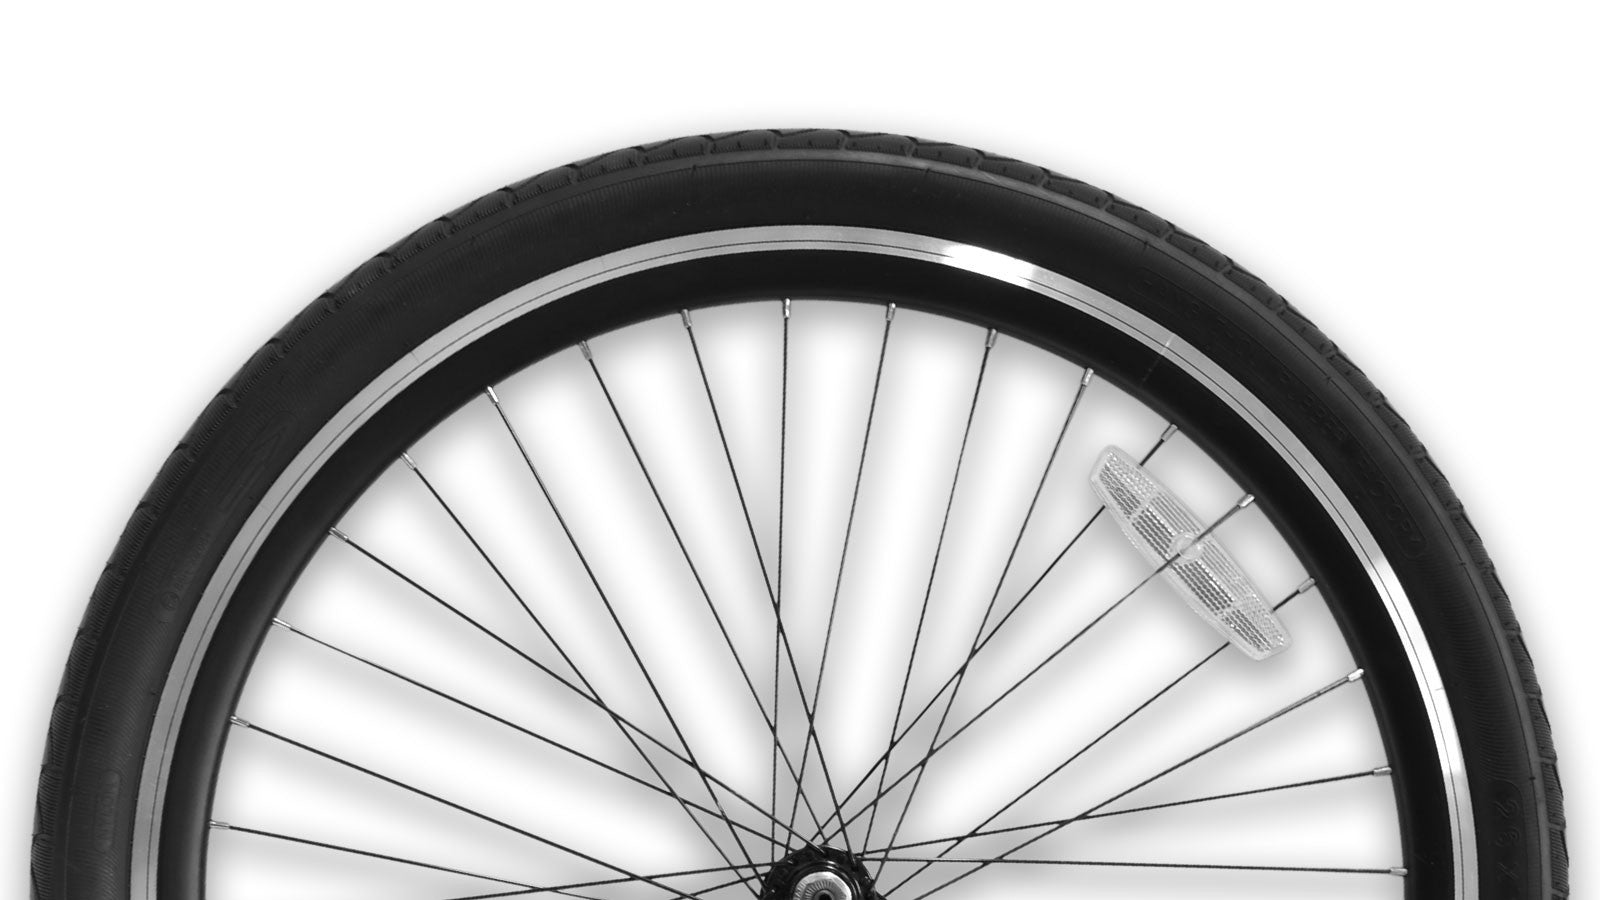 What's The Difference Between Beach Cruiser Wheels And Other Bike Tires?